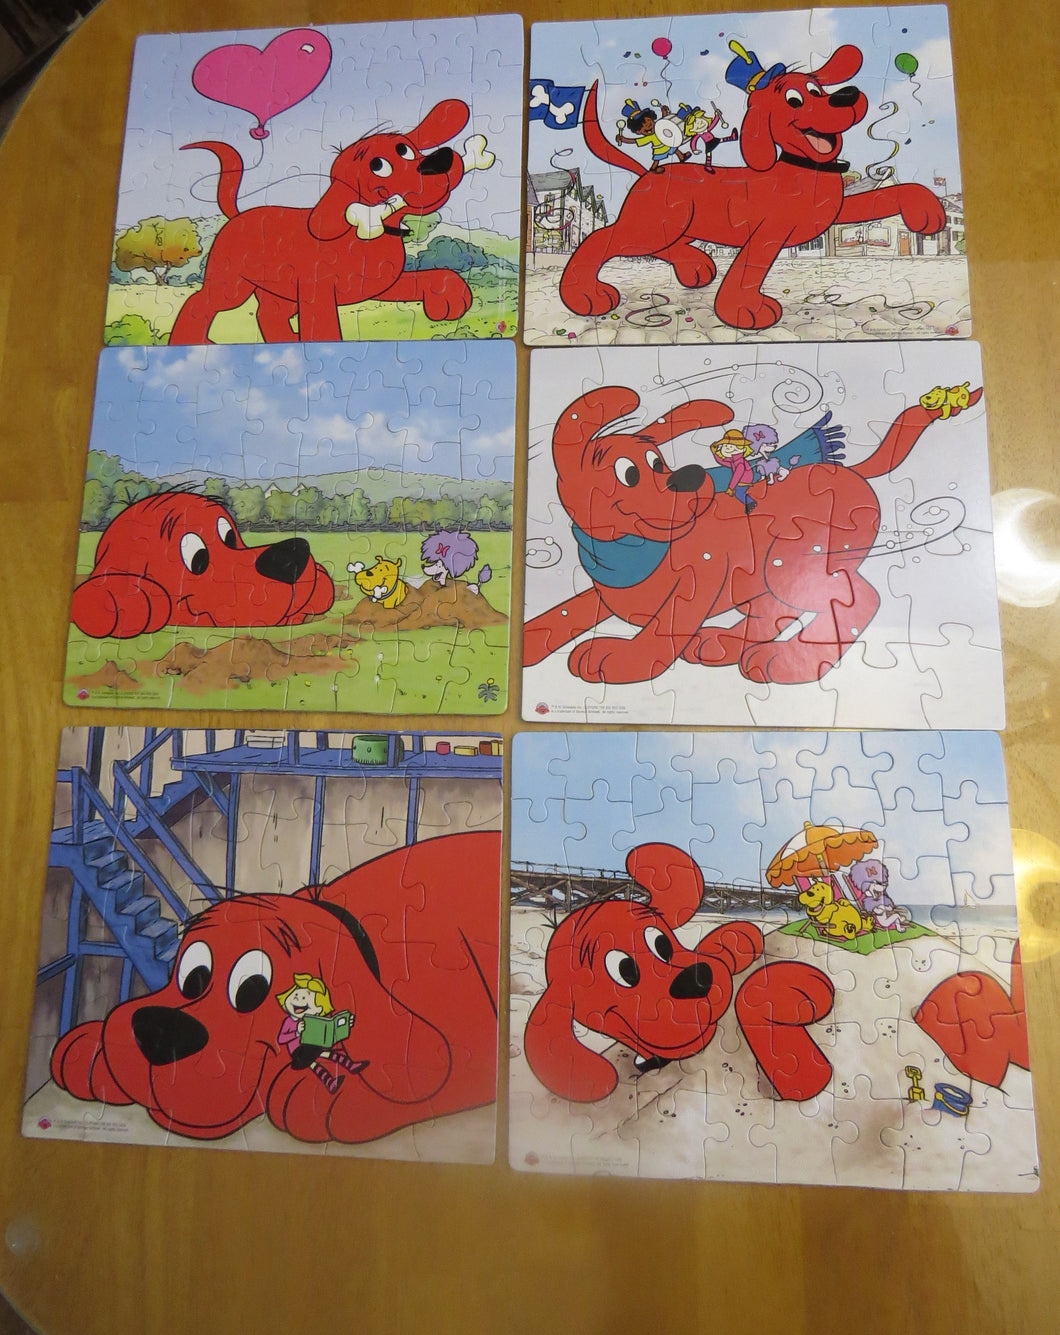 CLIFFORD THE BIG RED DOG - PUZZLE - 216 pcs TOTAL(3x24)(3x48) - complete w box